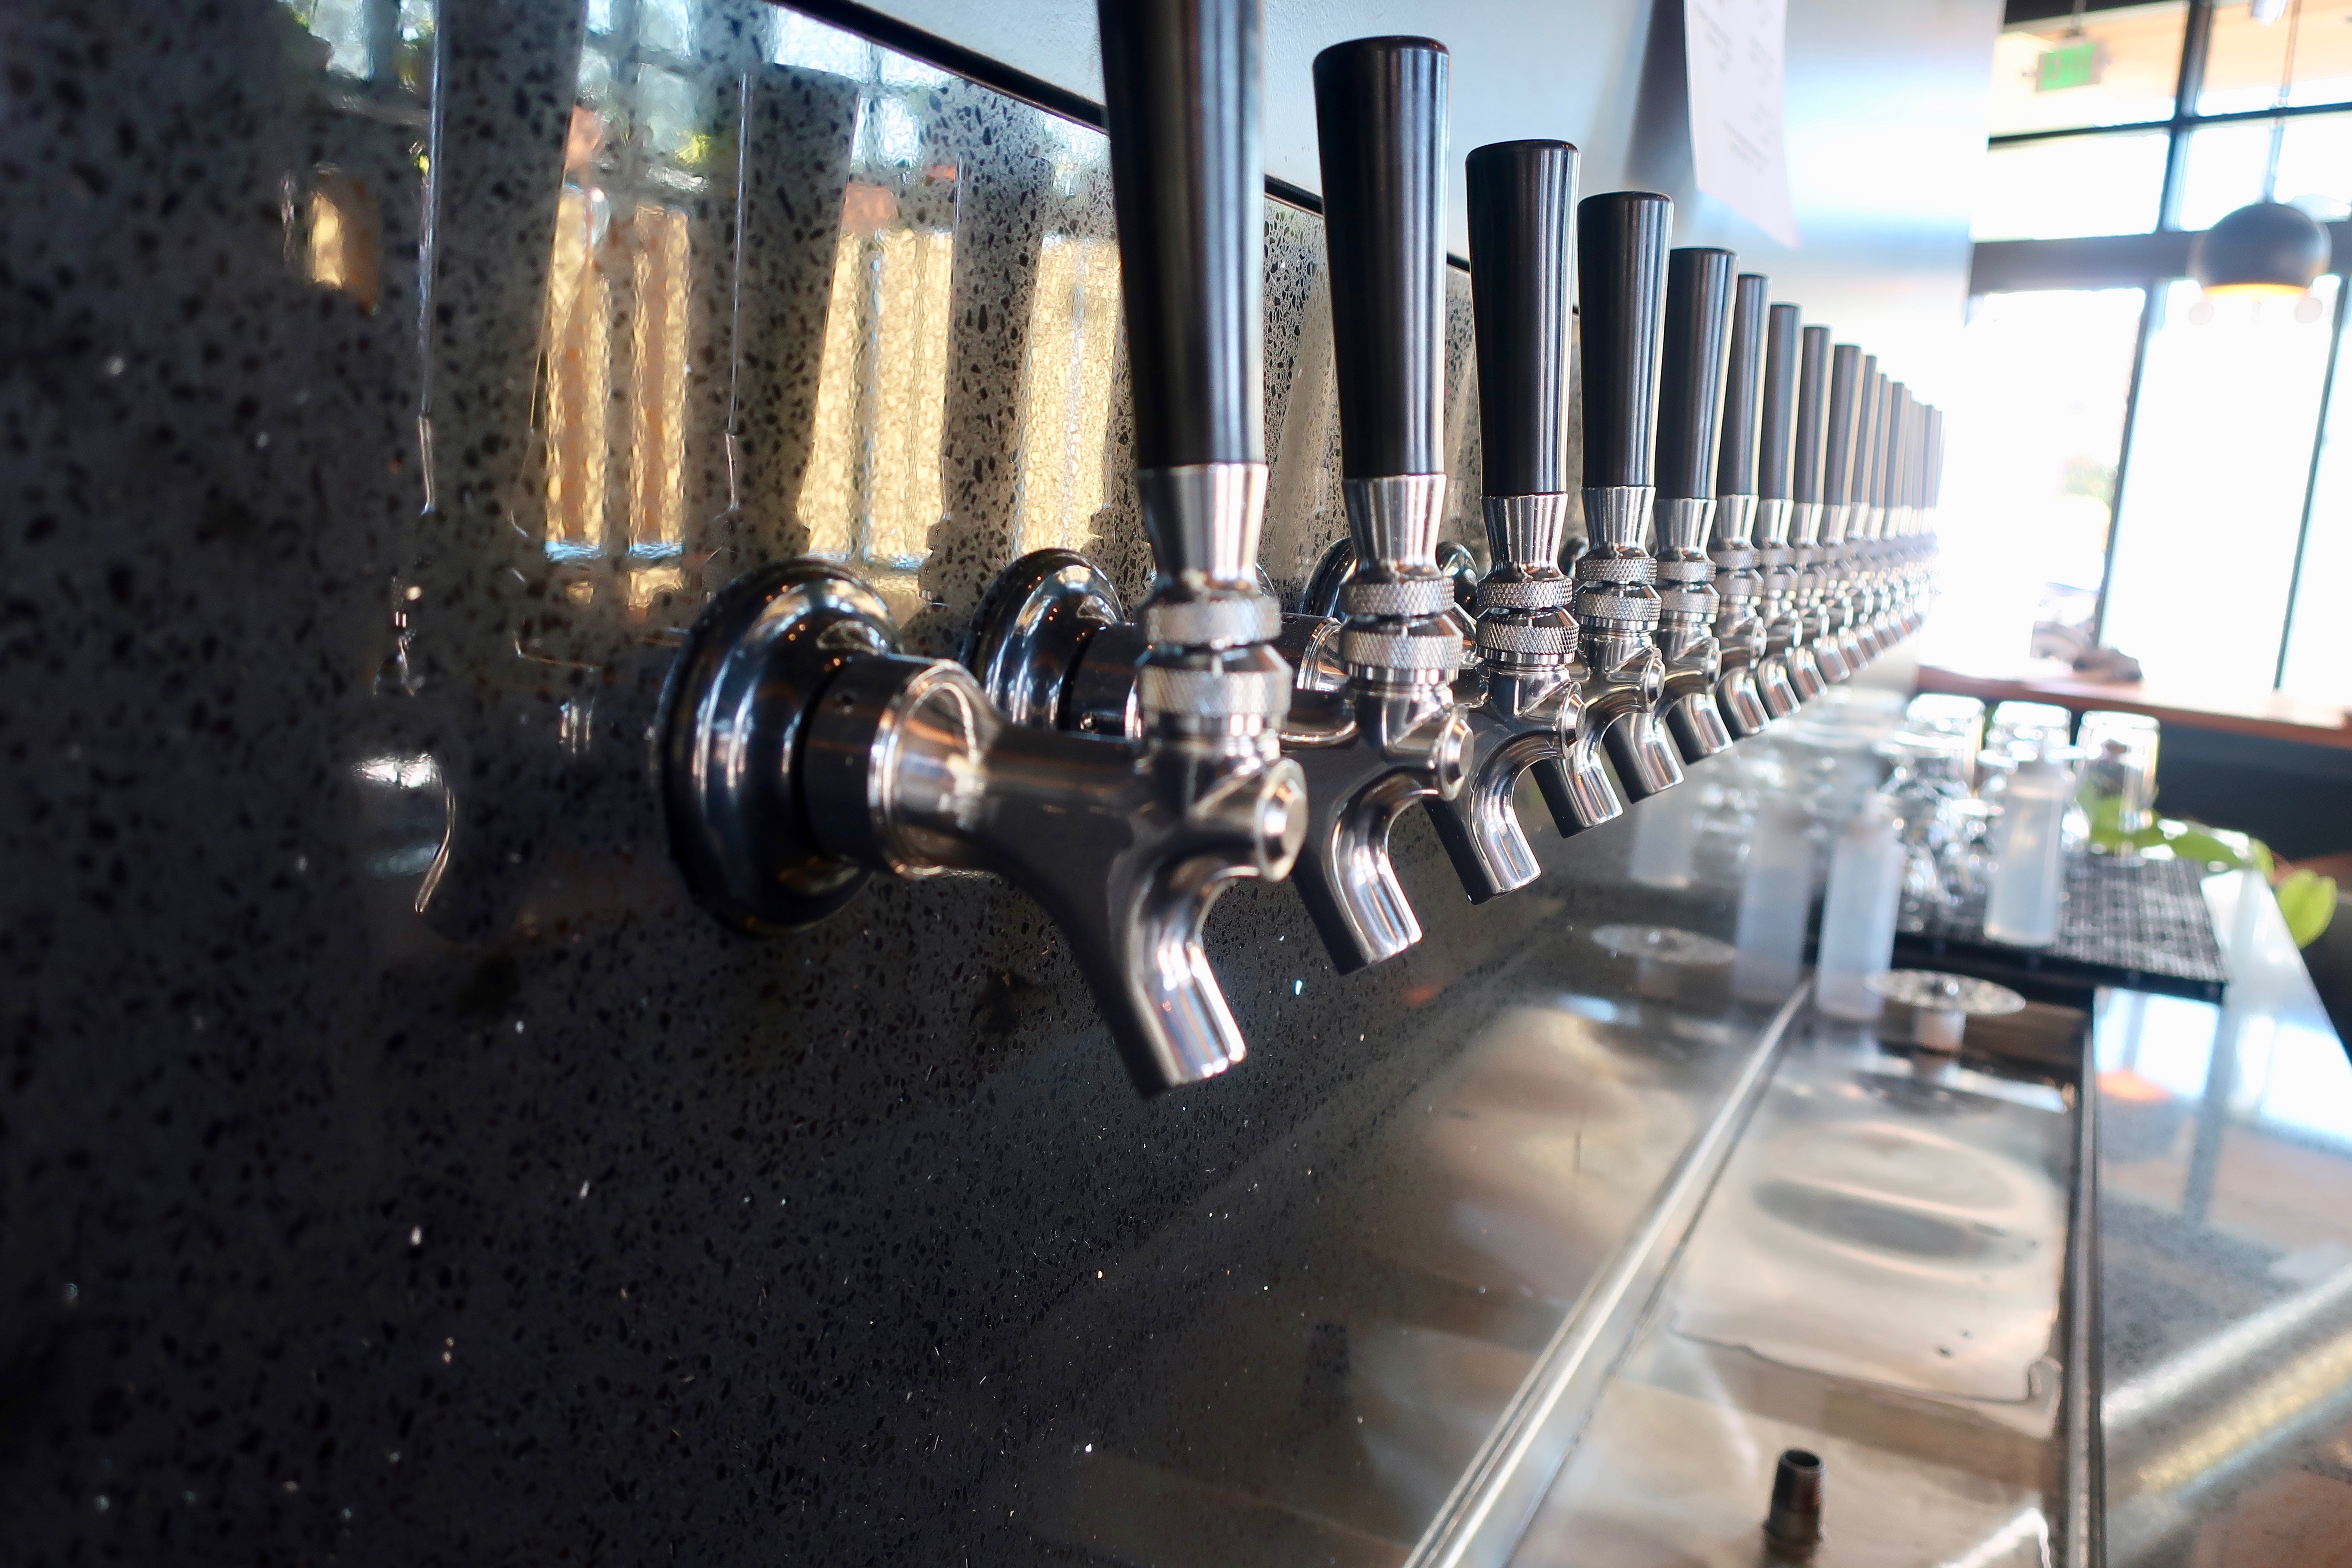 Mayfly Taproom & Bottle Shop serves from 16 rotating taps.